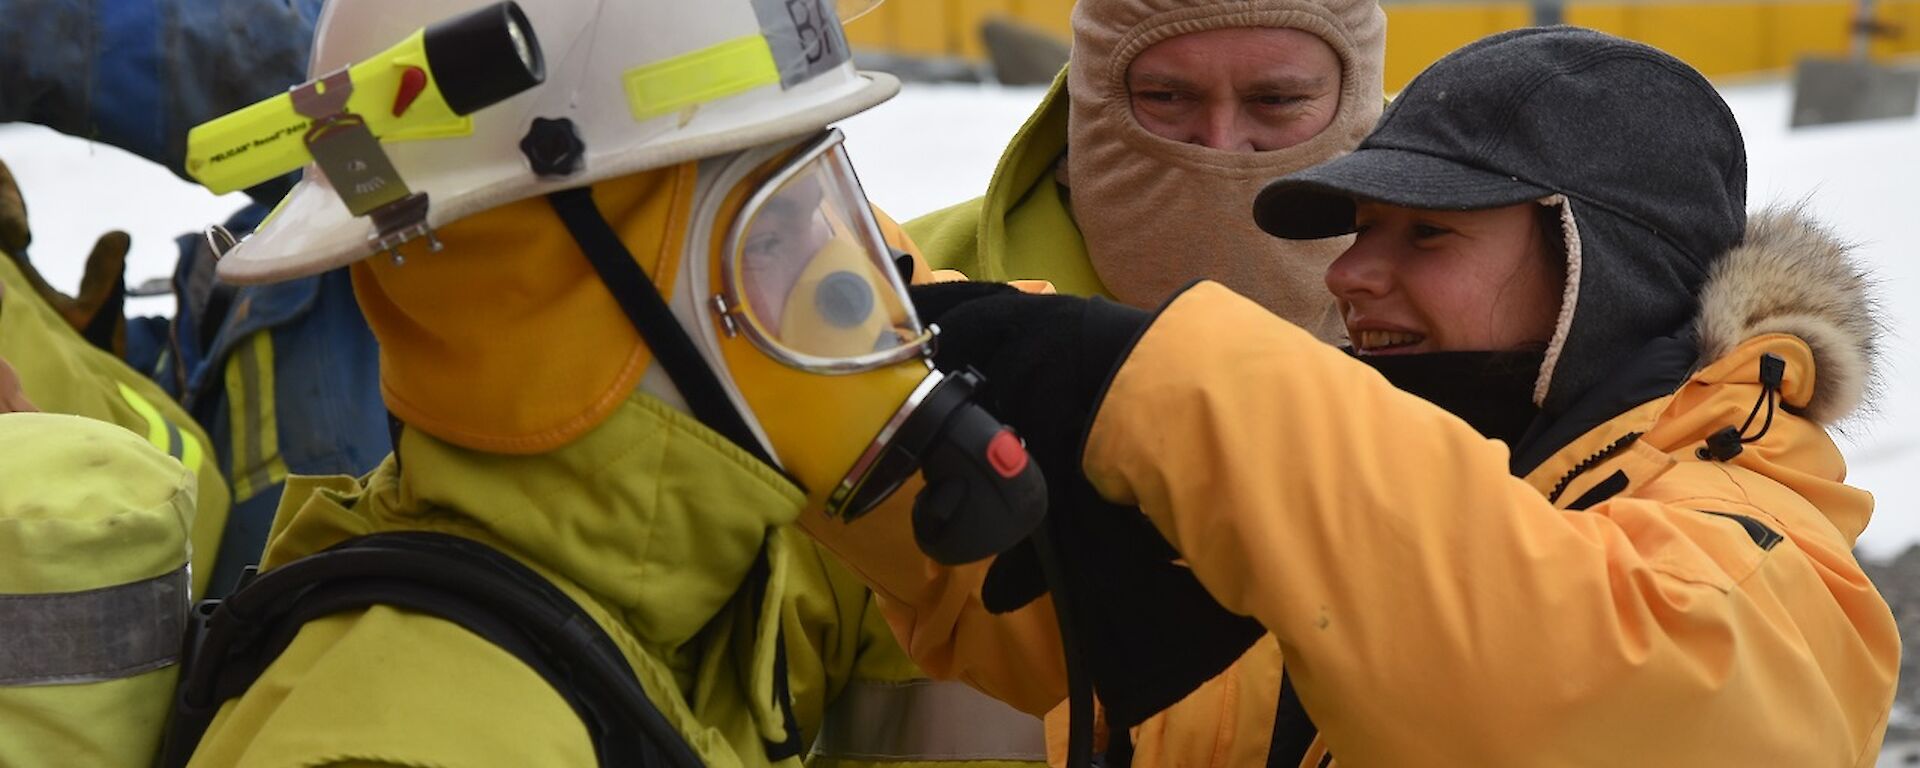 Expeditioner assists another with breathing apparatus during a fire drill